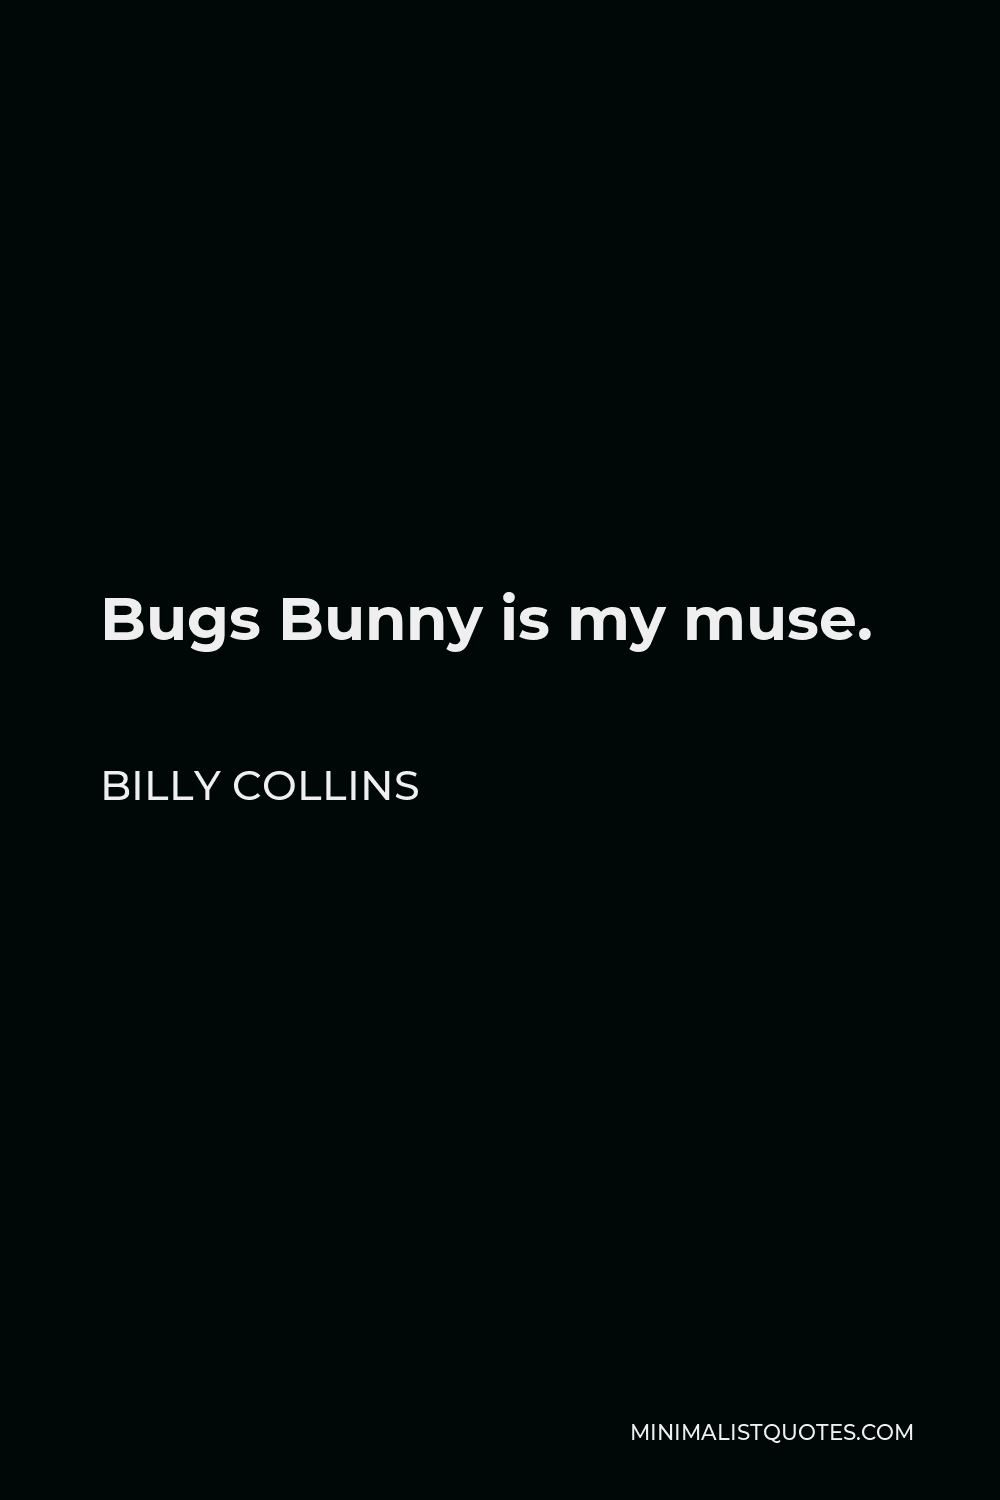 Billy Collins Quote - Bugs Bunny is my muse.